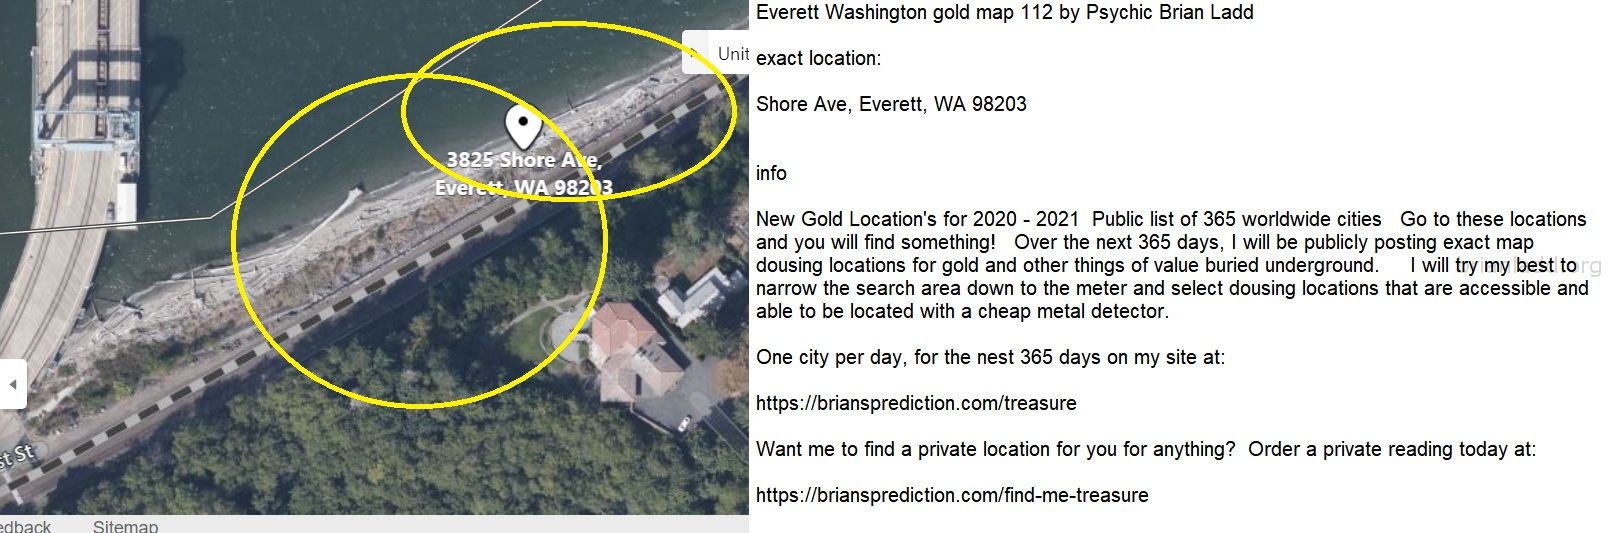 Everett Washington gold map 112 by Psychic Brian Ladd
New Gold Location's for 2020 - 2021  Public list of 365 worldwide cities   Go to these locations and you will find something!   Over the next 365 days, I will be publicly posting exact map dousing locations for gold and other things of value buried underground.     I will try my best to narrow the search area down to the meter and select dousing locations that are accessible and able to be located with a cheap metal detector. One city per day, for the nest 365 days on my site at:  https://briansprediction.com/treasure  Want me to find a private location for you for anything?  Order a private reading today at:  https://briansprediction.com/find-me-treasure
